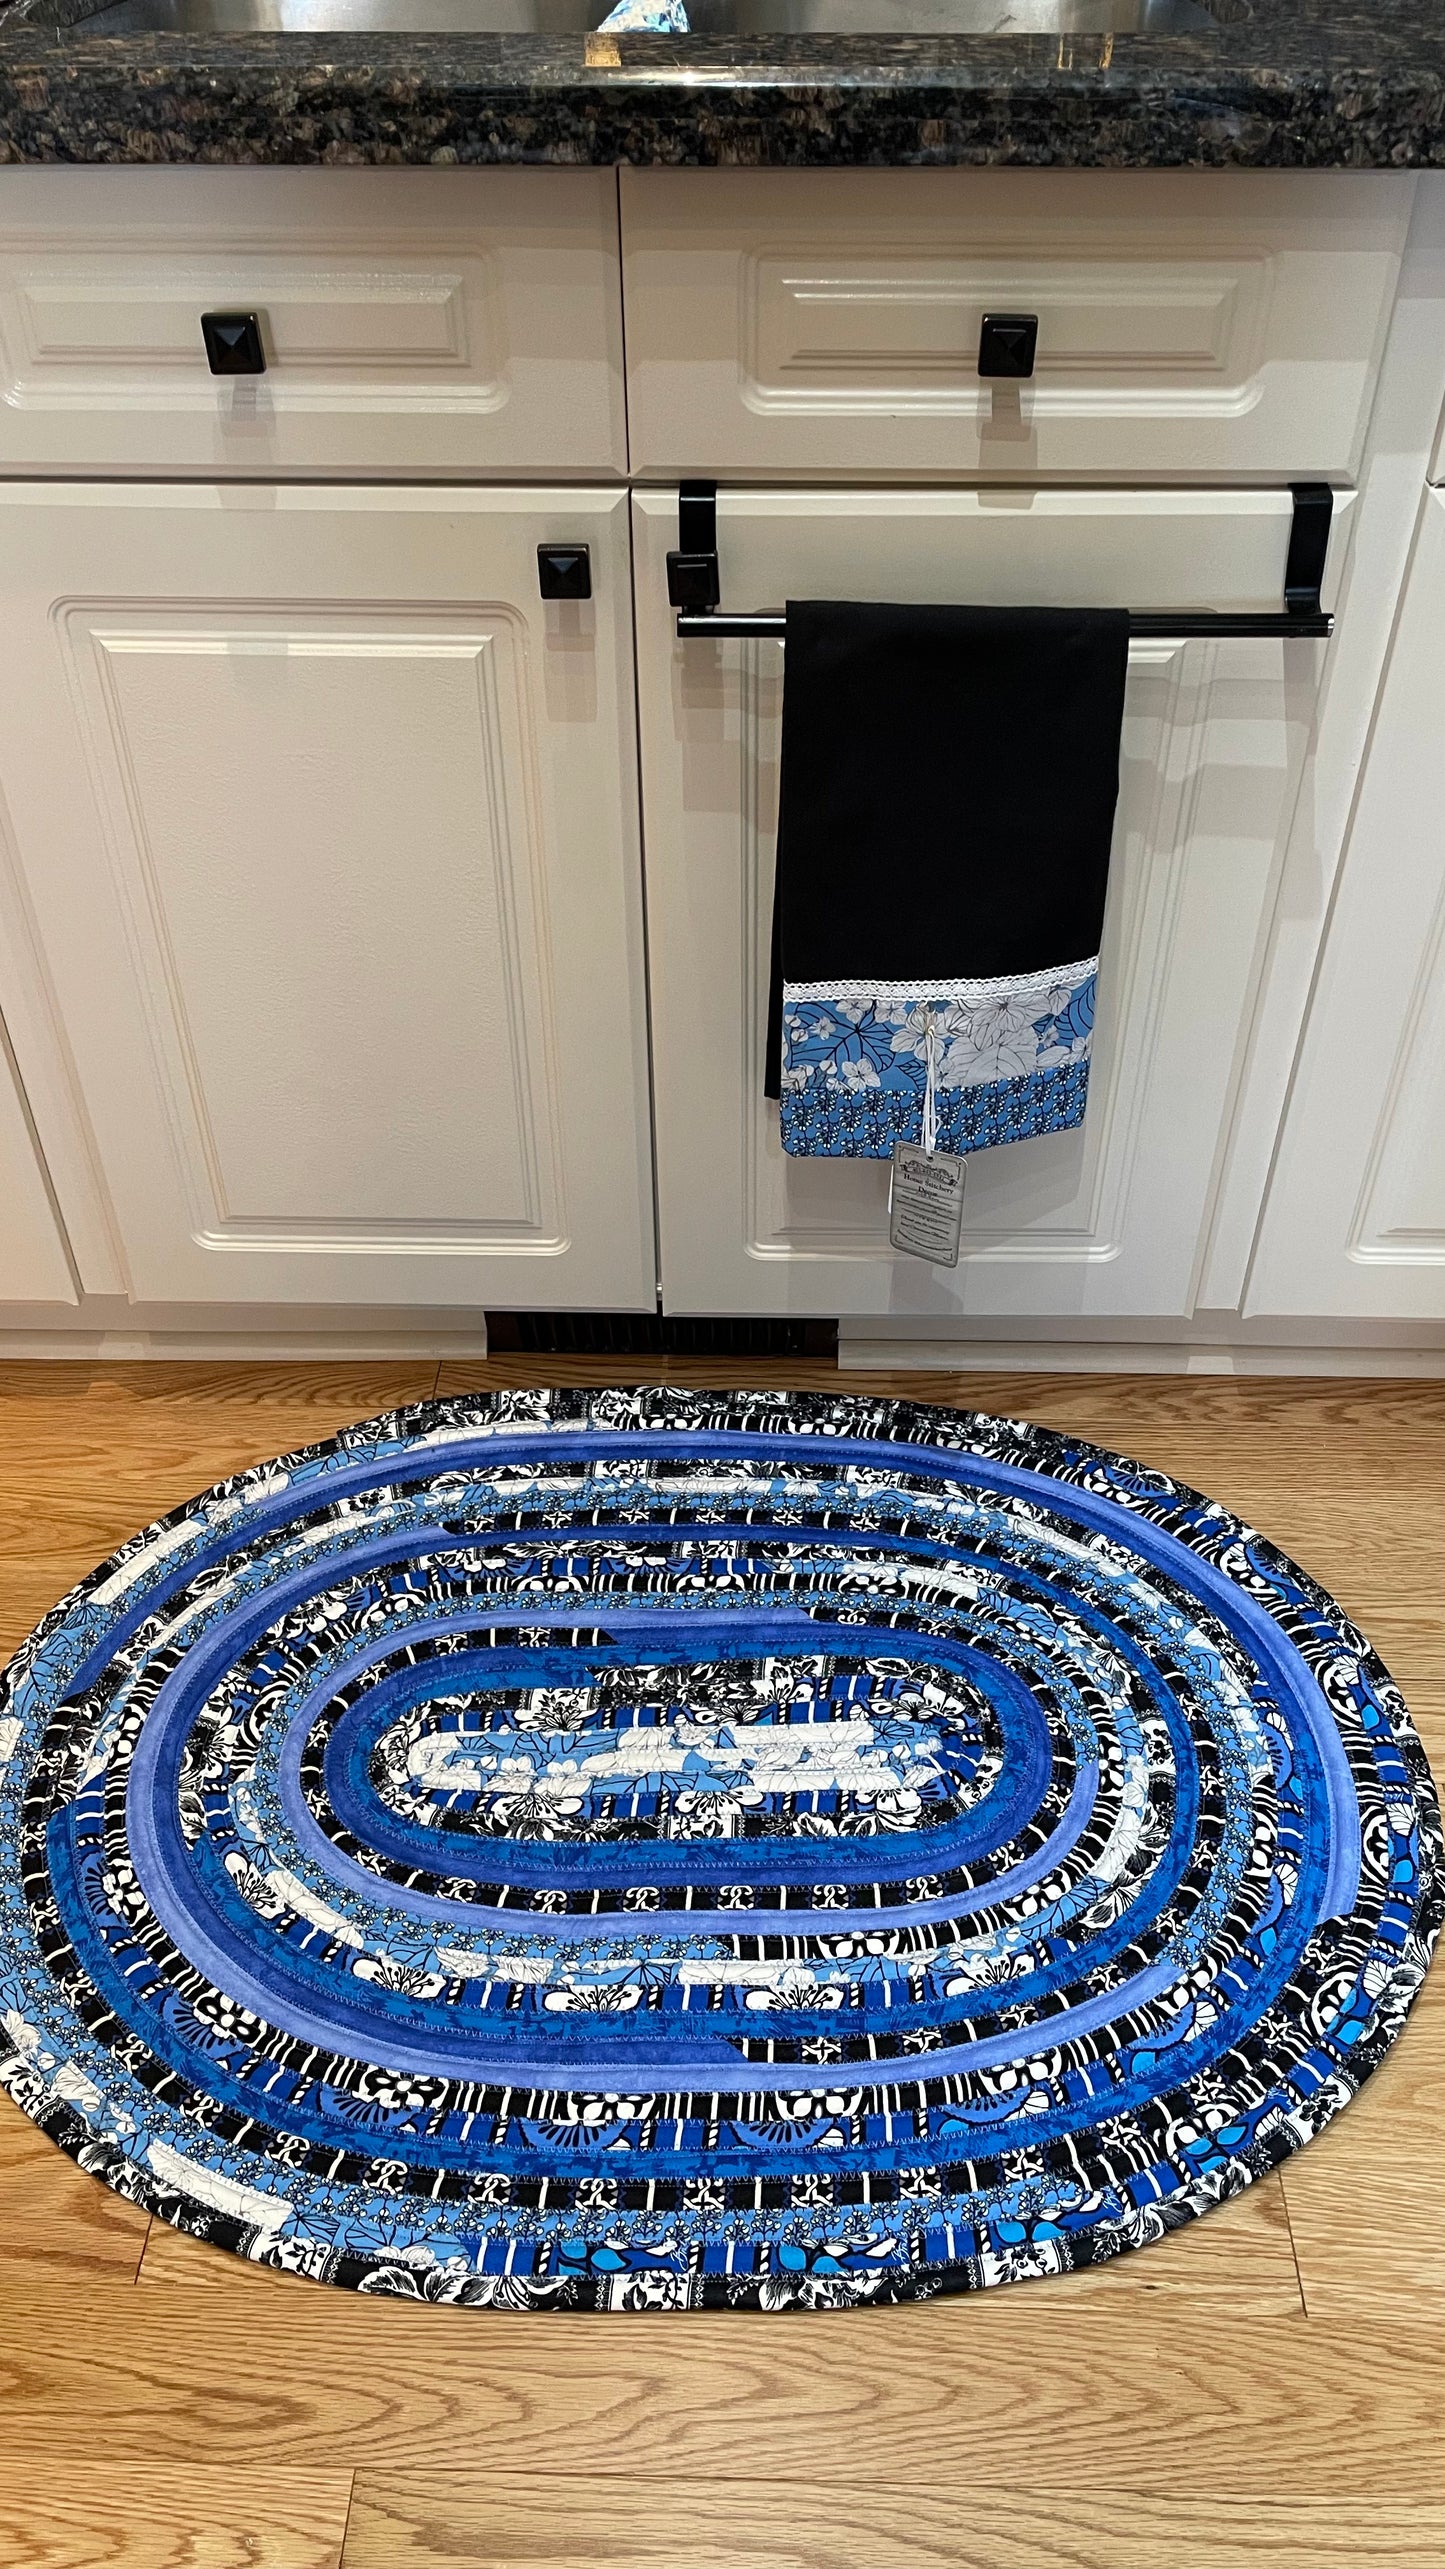 Vibrant blue, black and white kitchen accent rug. Washable handcrafted kitchen accent rug. Can also be used as a bedside rug, luxury bathmat or nursery room rug. Made in Canada and part of a collection of mix and match decor. Shop all the products or follow along on the Home Stitchery Decor YouTube Channel for sewing tutorials including JellyRoll Rug Tutorials.